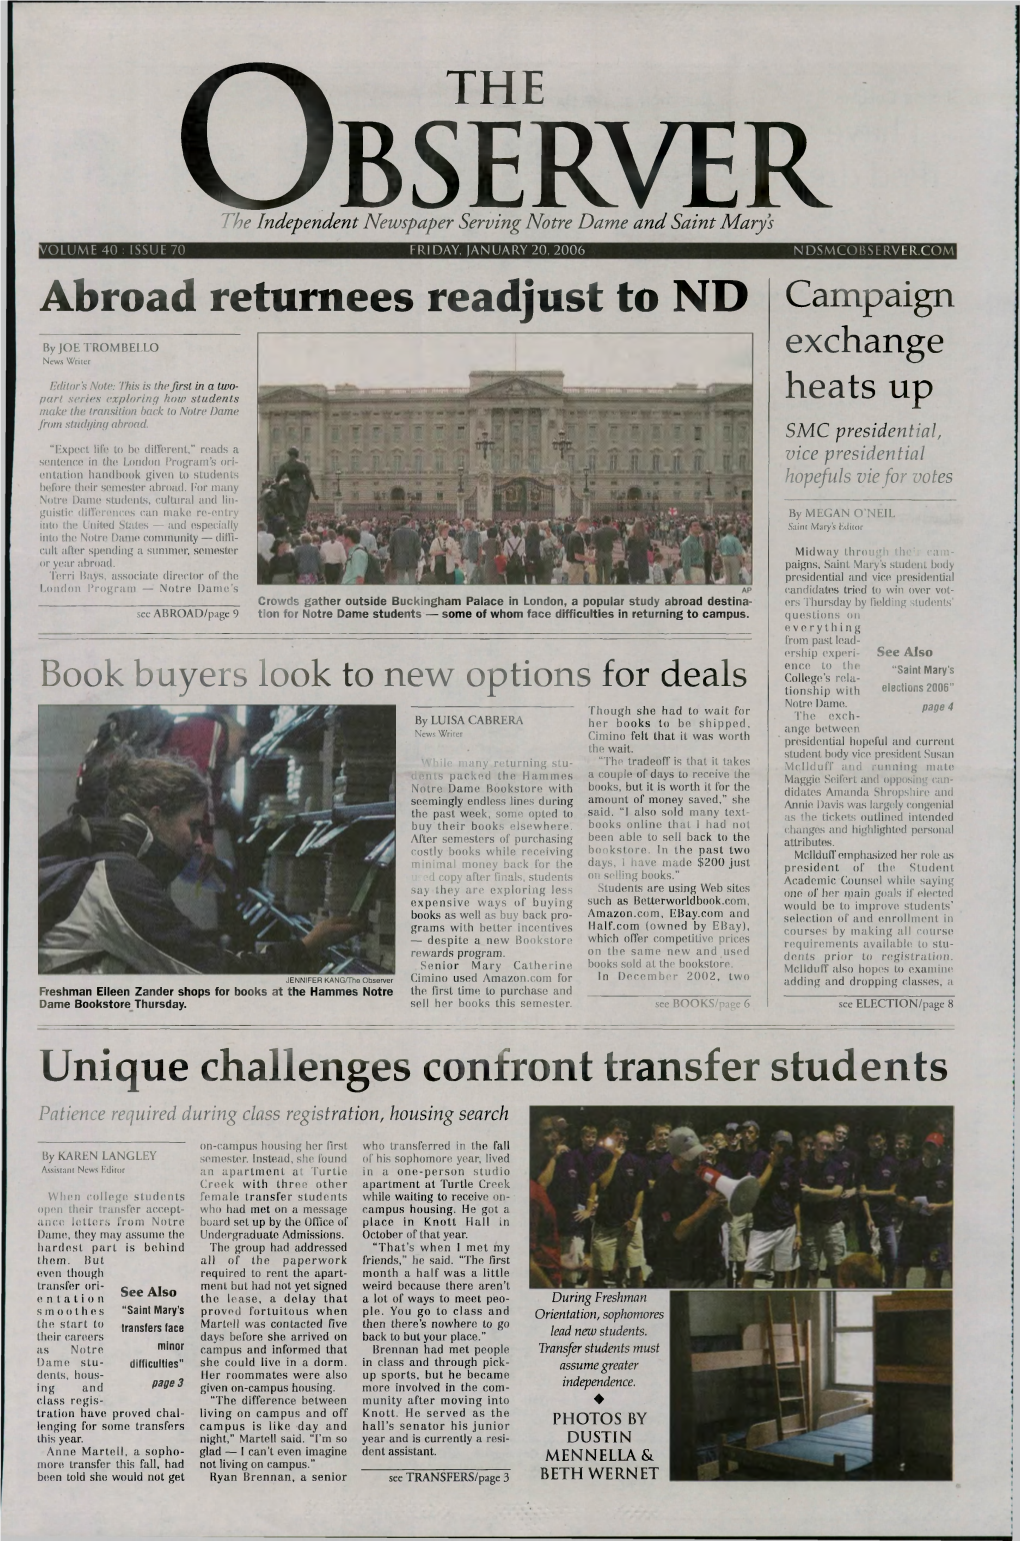 —™--", T M :: ' 7 * Abroad Returnees Readjust to ND